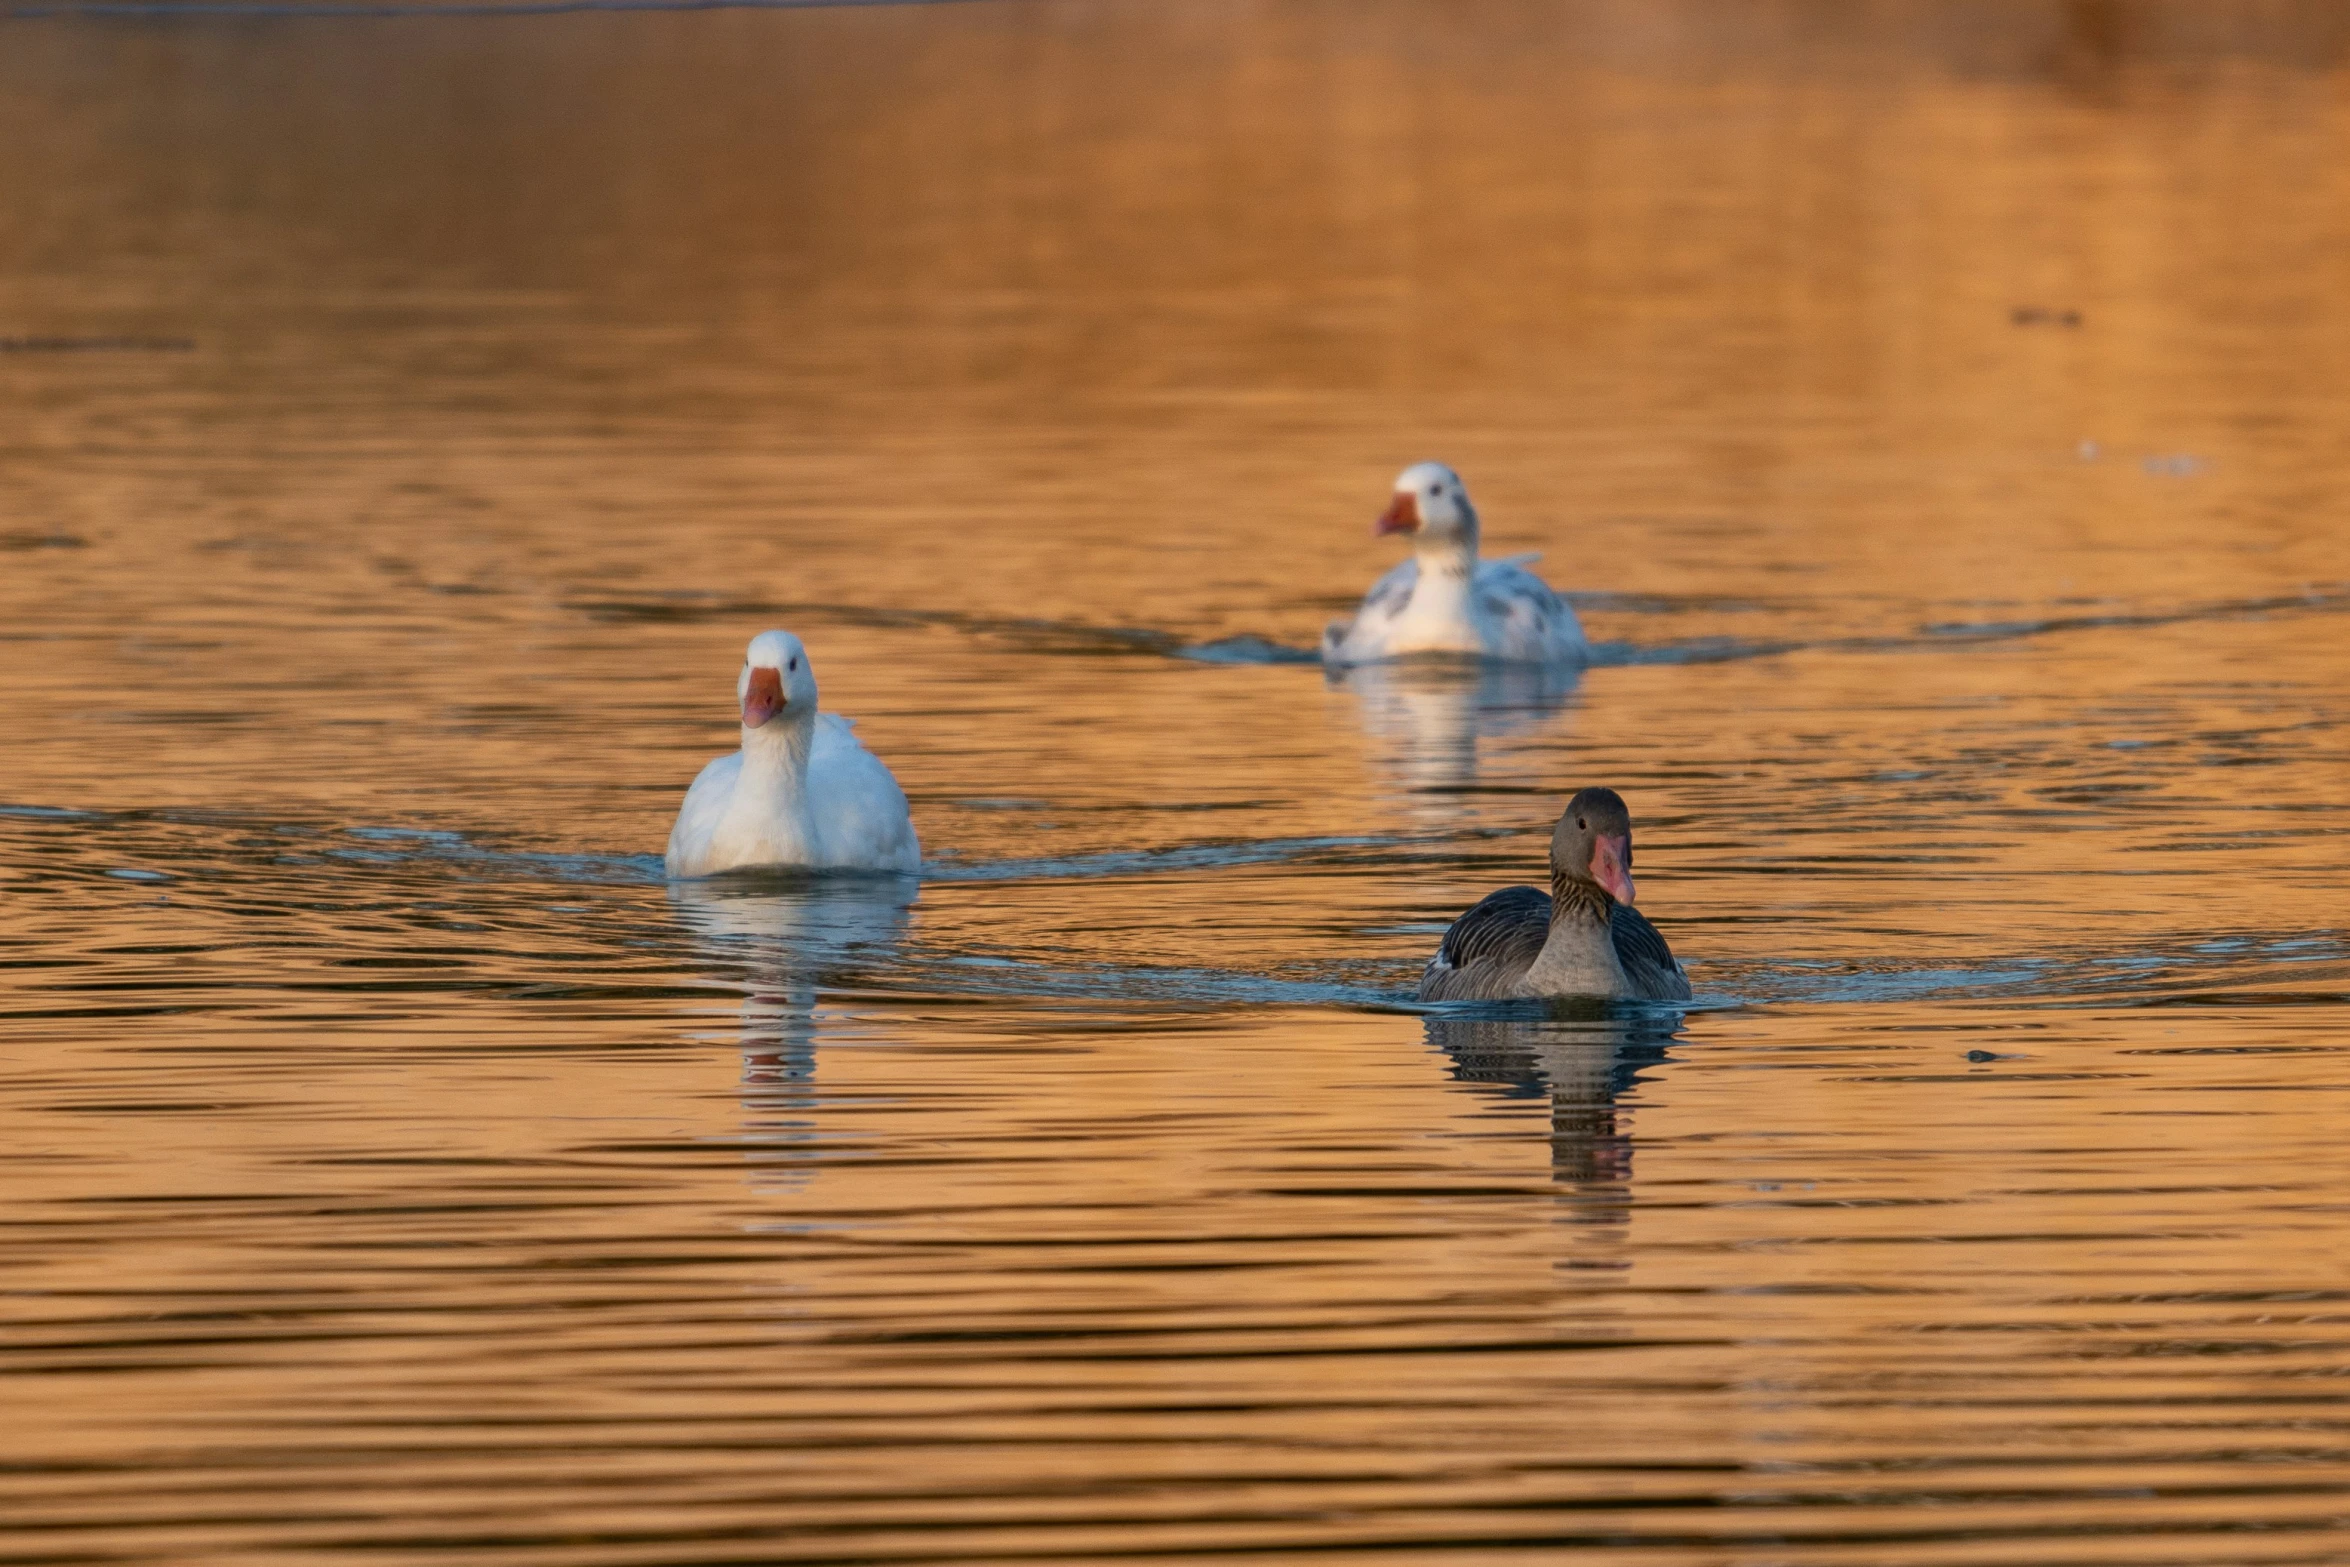 a group of ducks swimming in the water